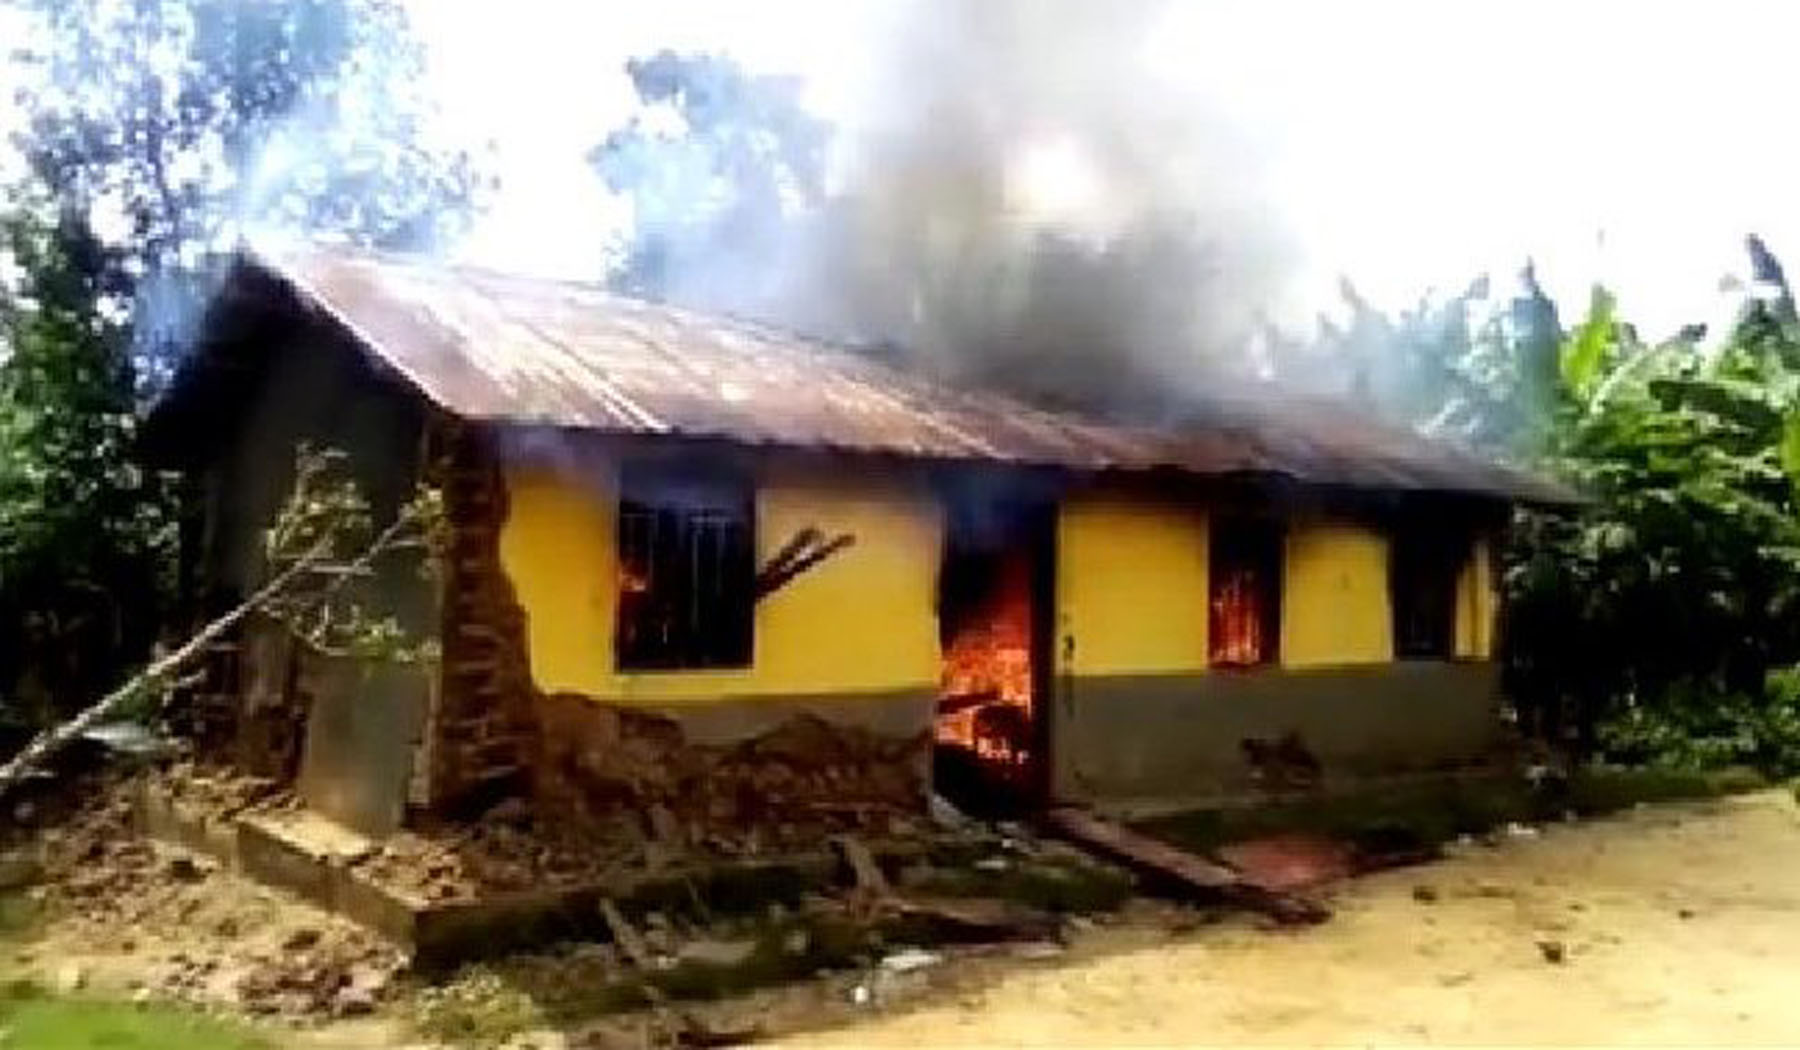 Unknown Residents set on fire a House of their fellow in Kisoro district.